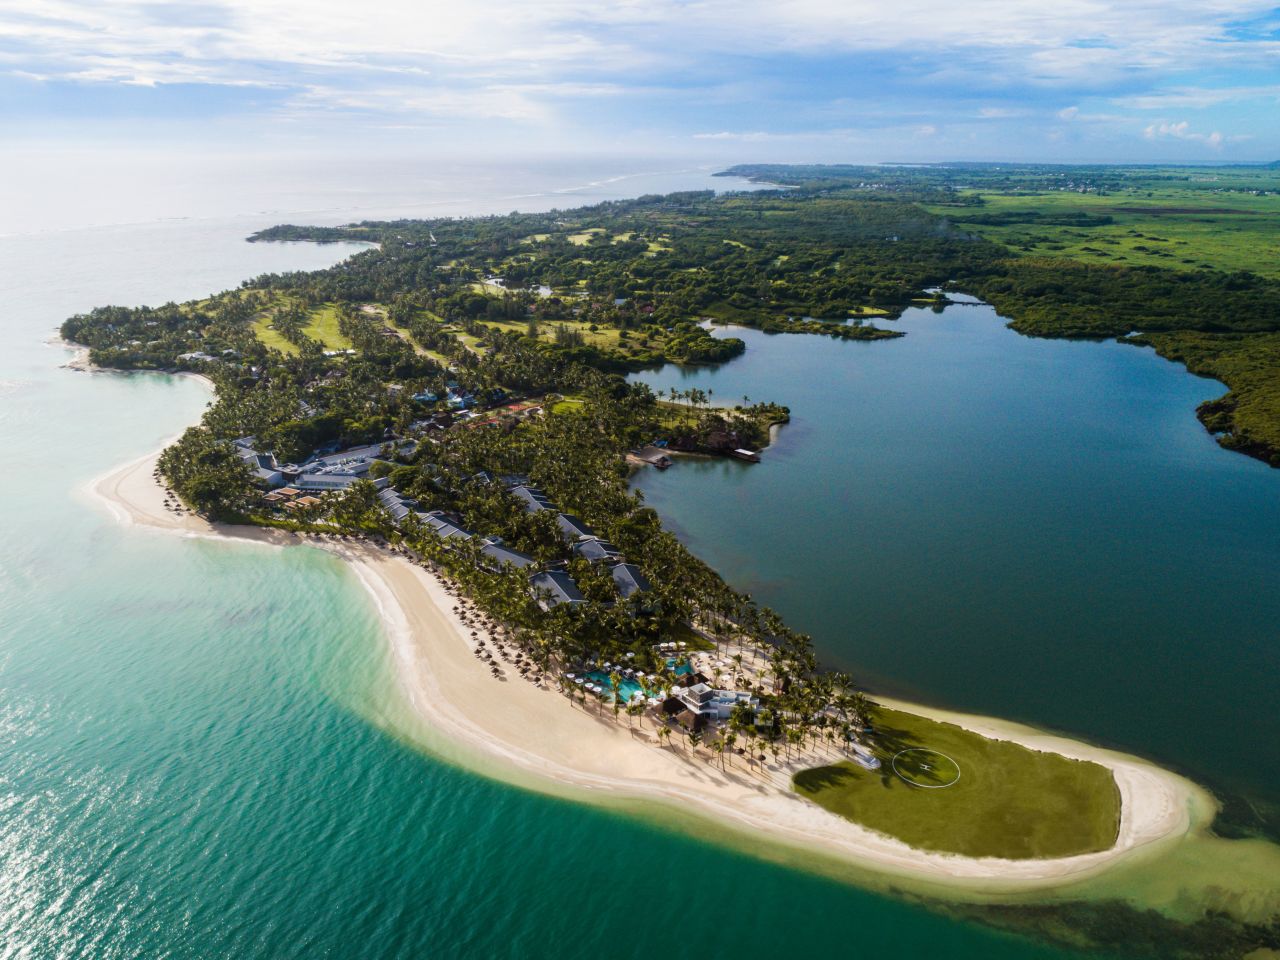 The One&Only resort brand, which operates properties in 10 countries, is building a private community consisting of 52 villas on the eastern coast of Mauritius. Located on a secluded peninsula next to the One&Only Le Saint Geran resort, villa owners will have full access to resort facilities and amenities.